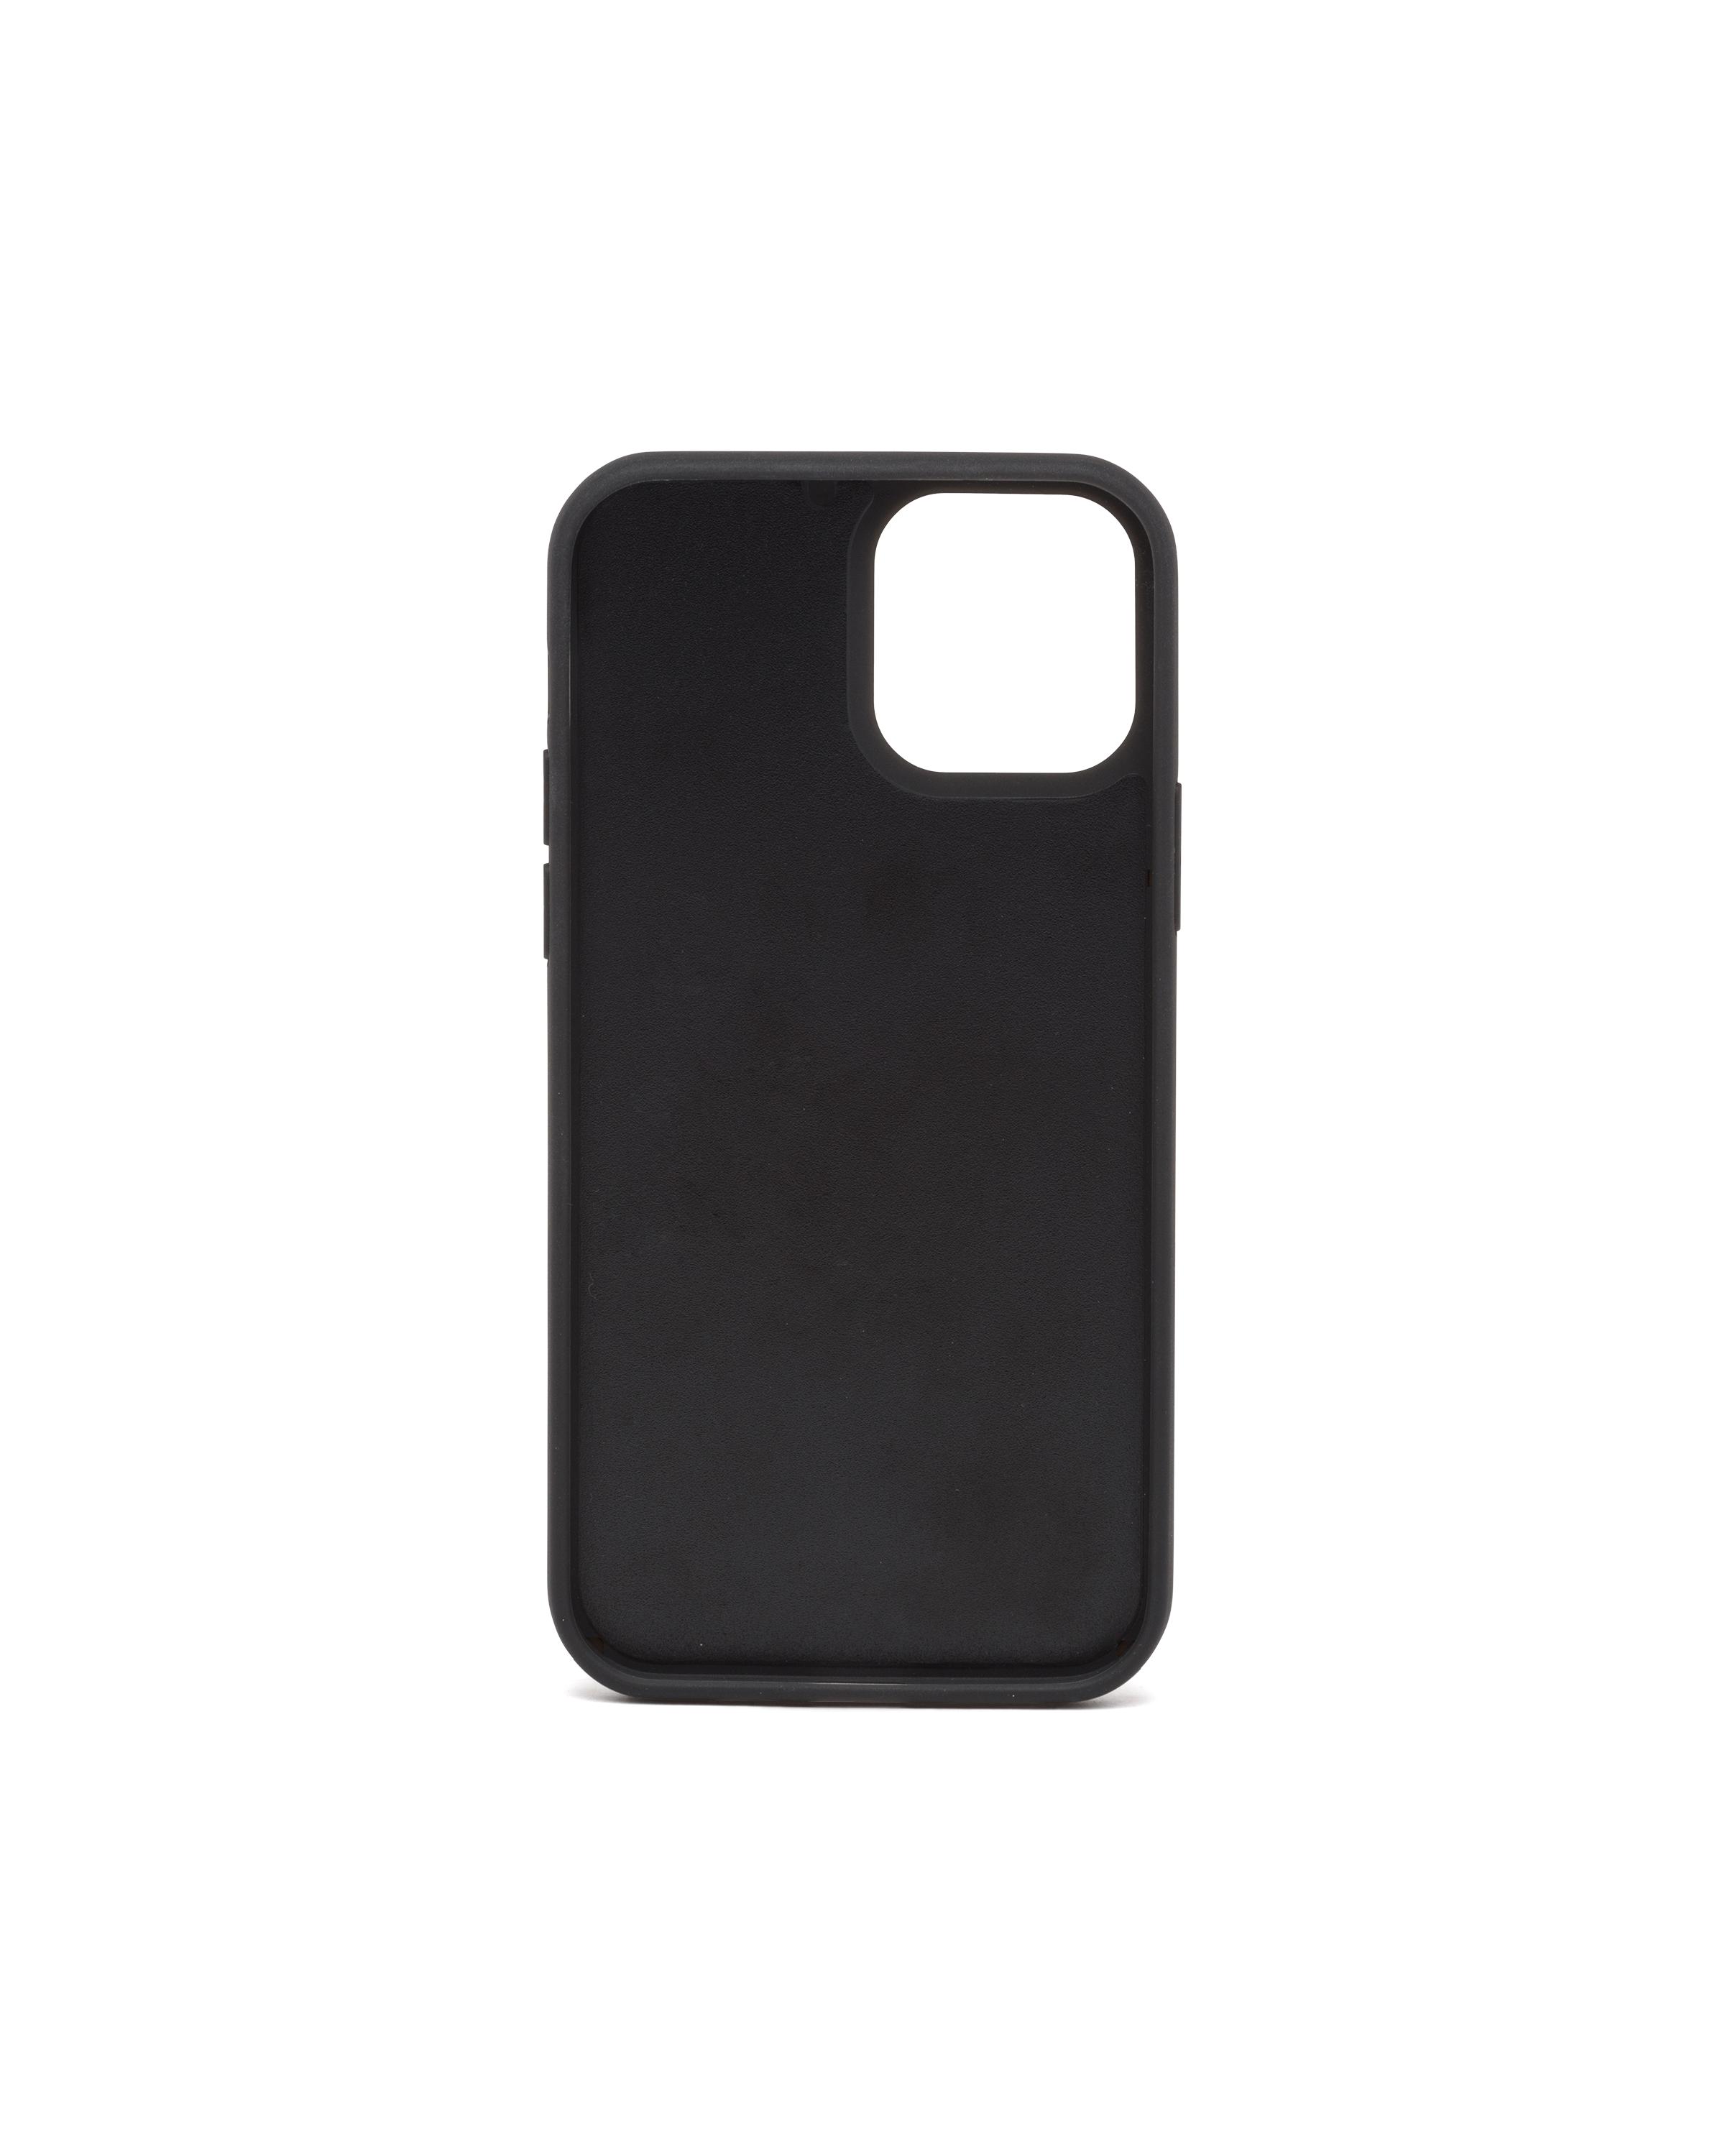 Prada Crystal-studded Iphone 12 And 12 Pro Cover in Black | Lyst